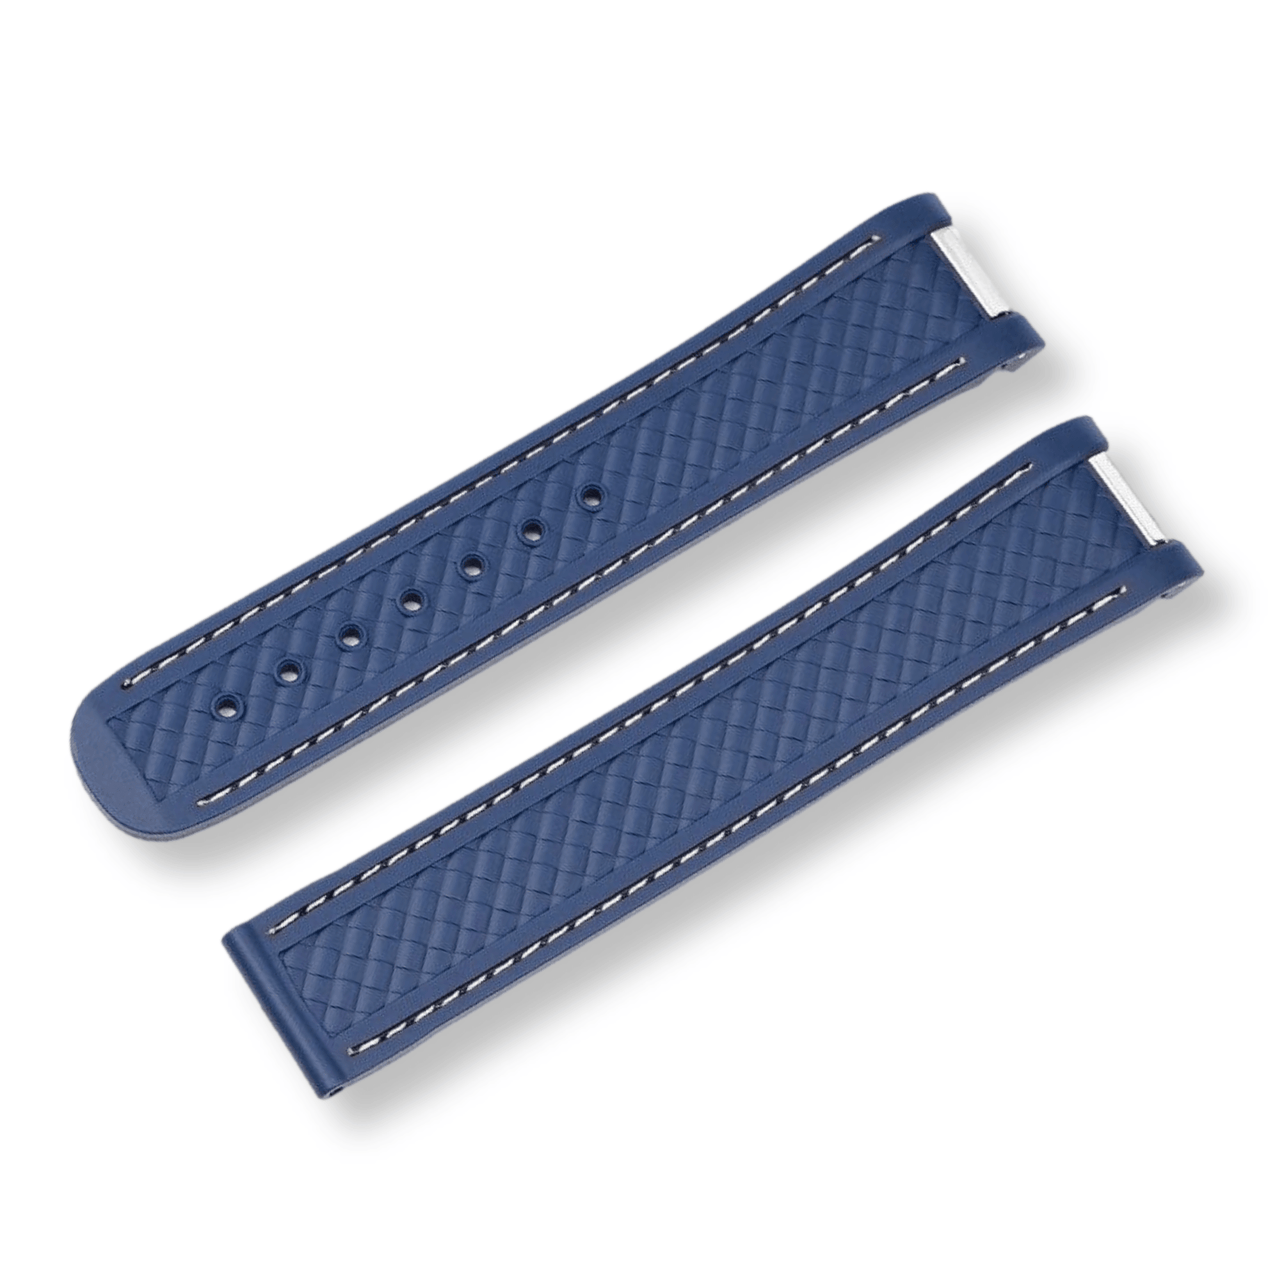 Rubber Silicone Strap for Omega Seamaster 150 - watchband.direct